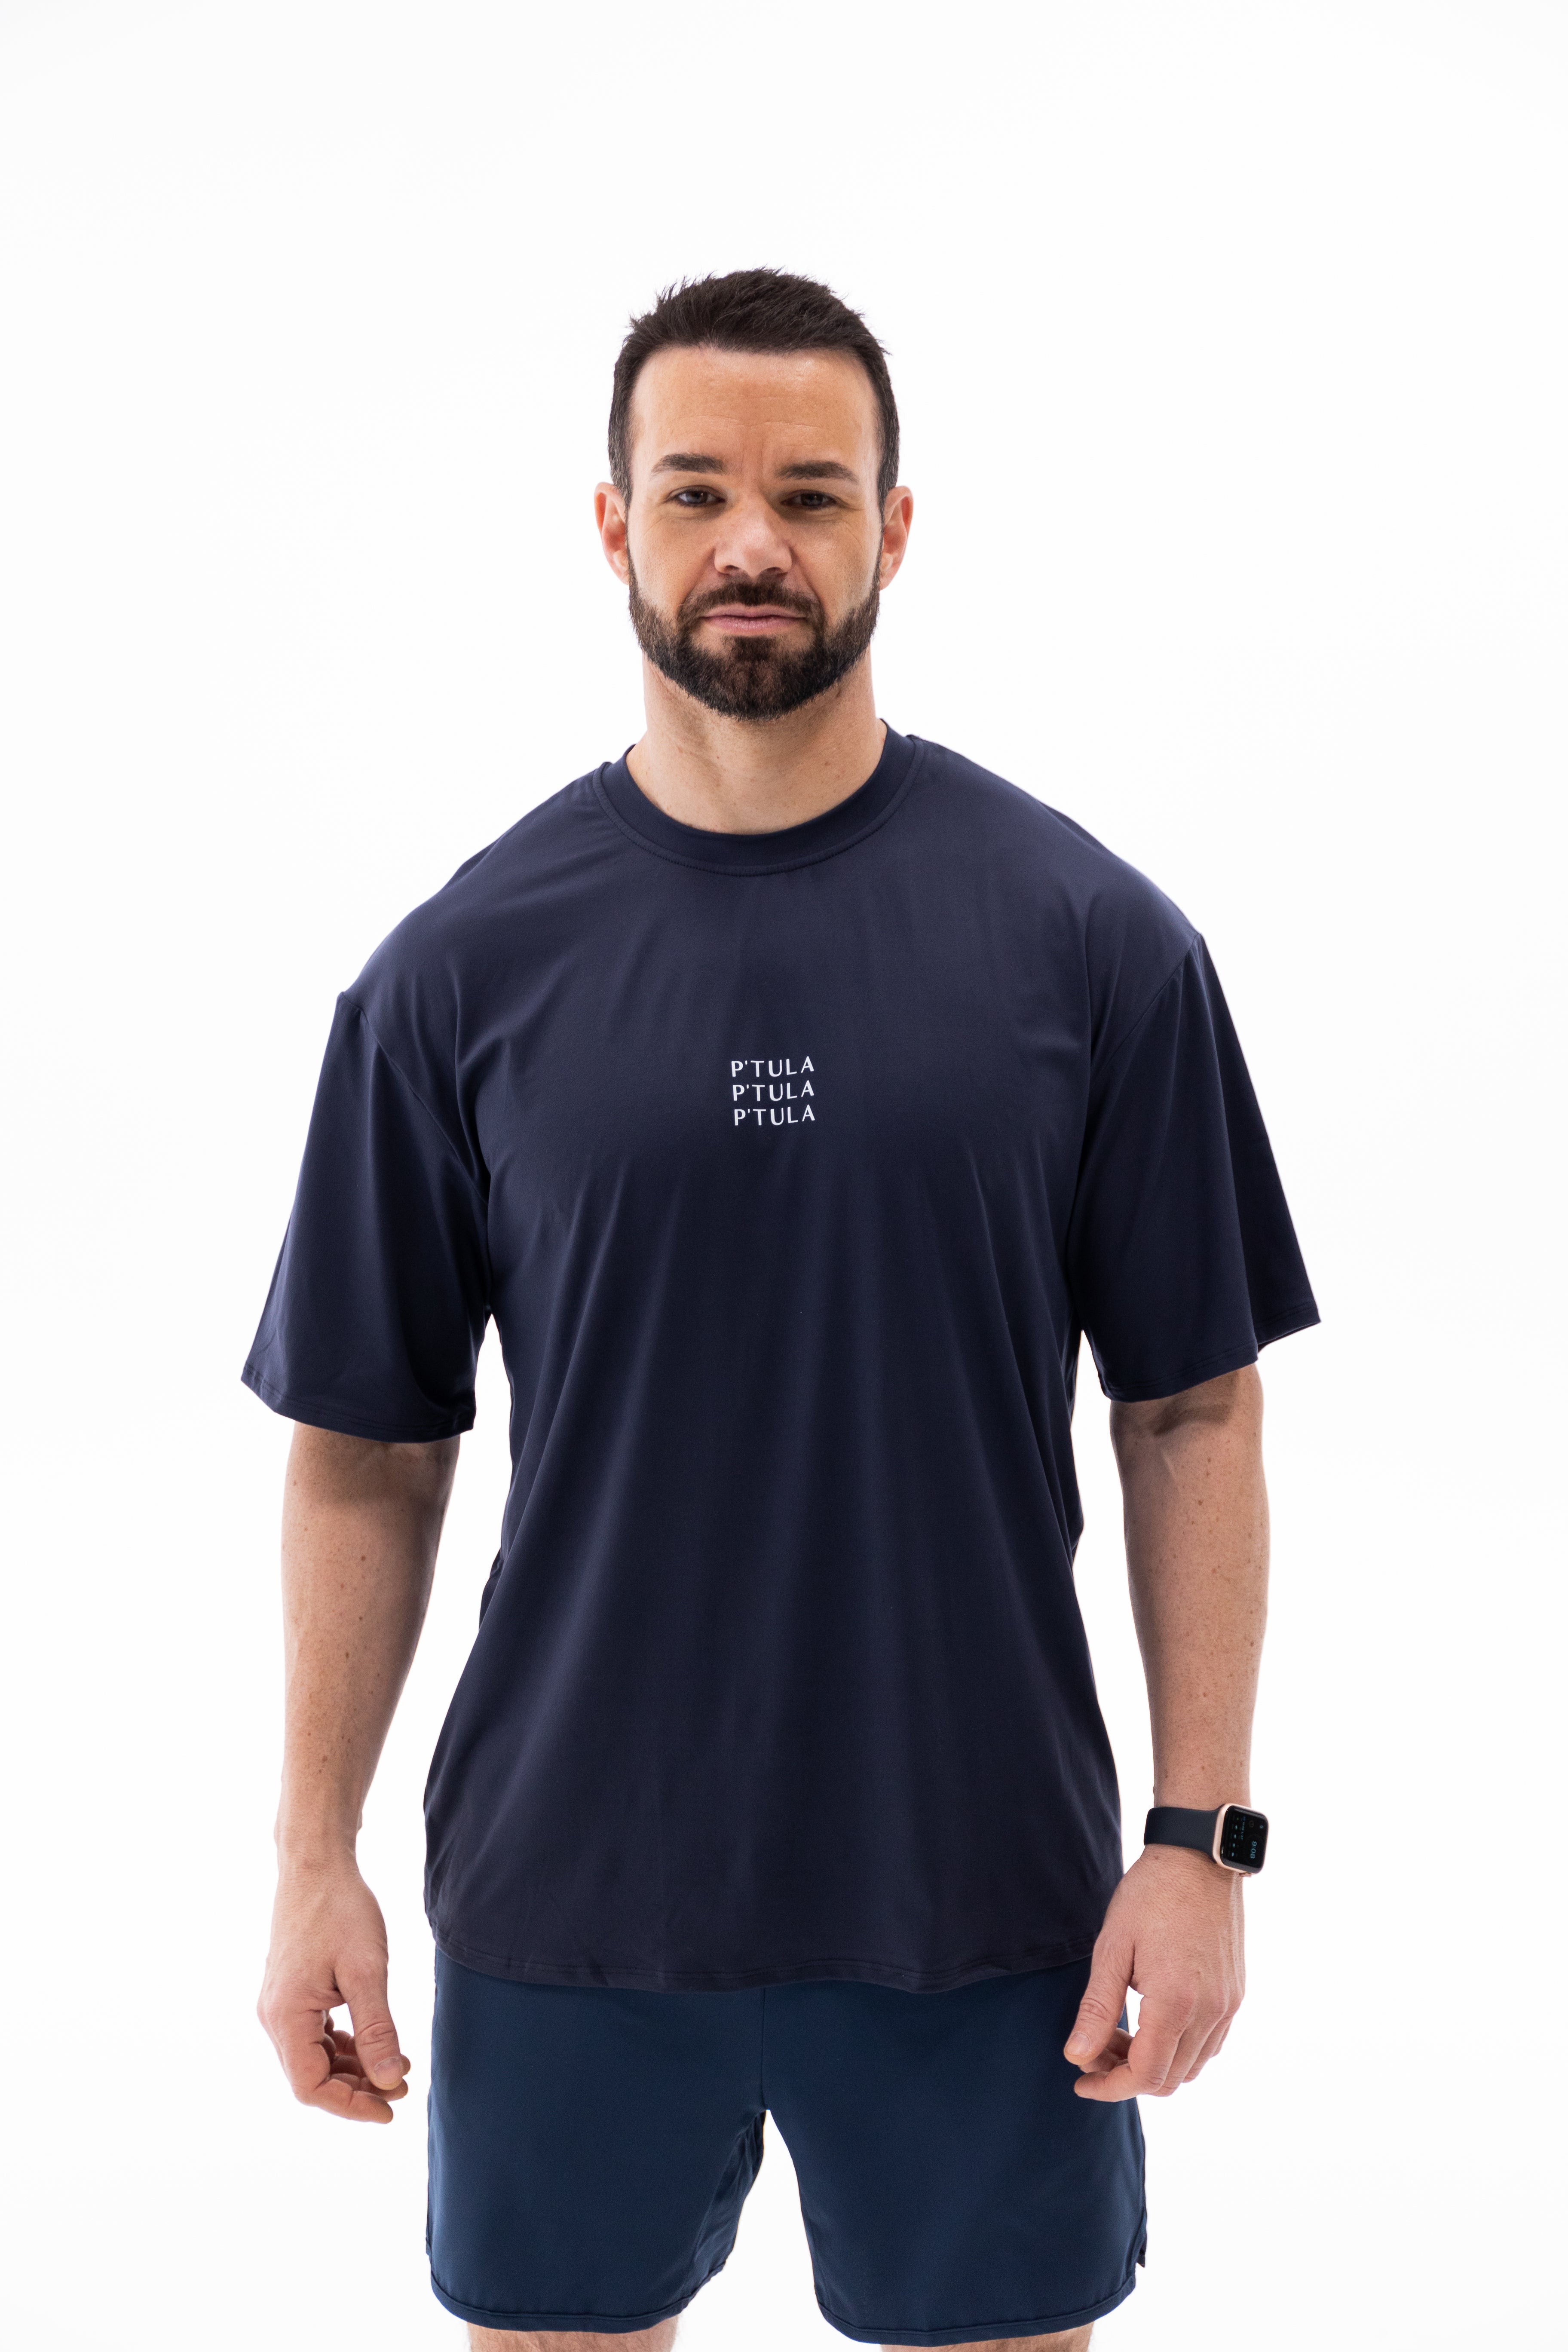 Fitted T-Shirt – Ptula